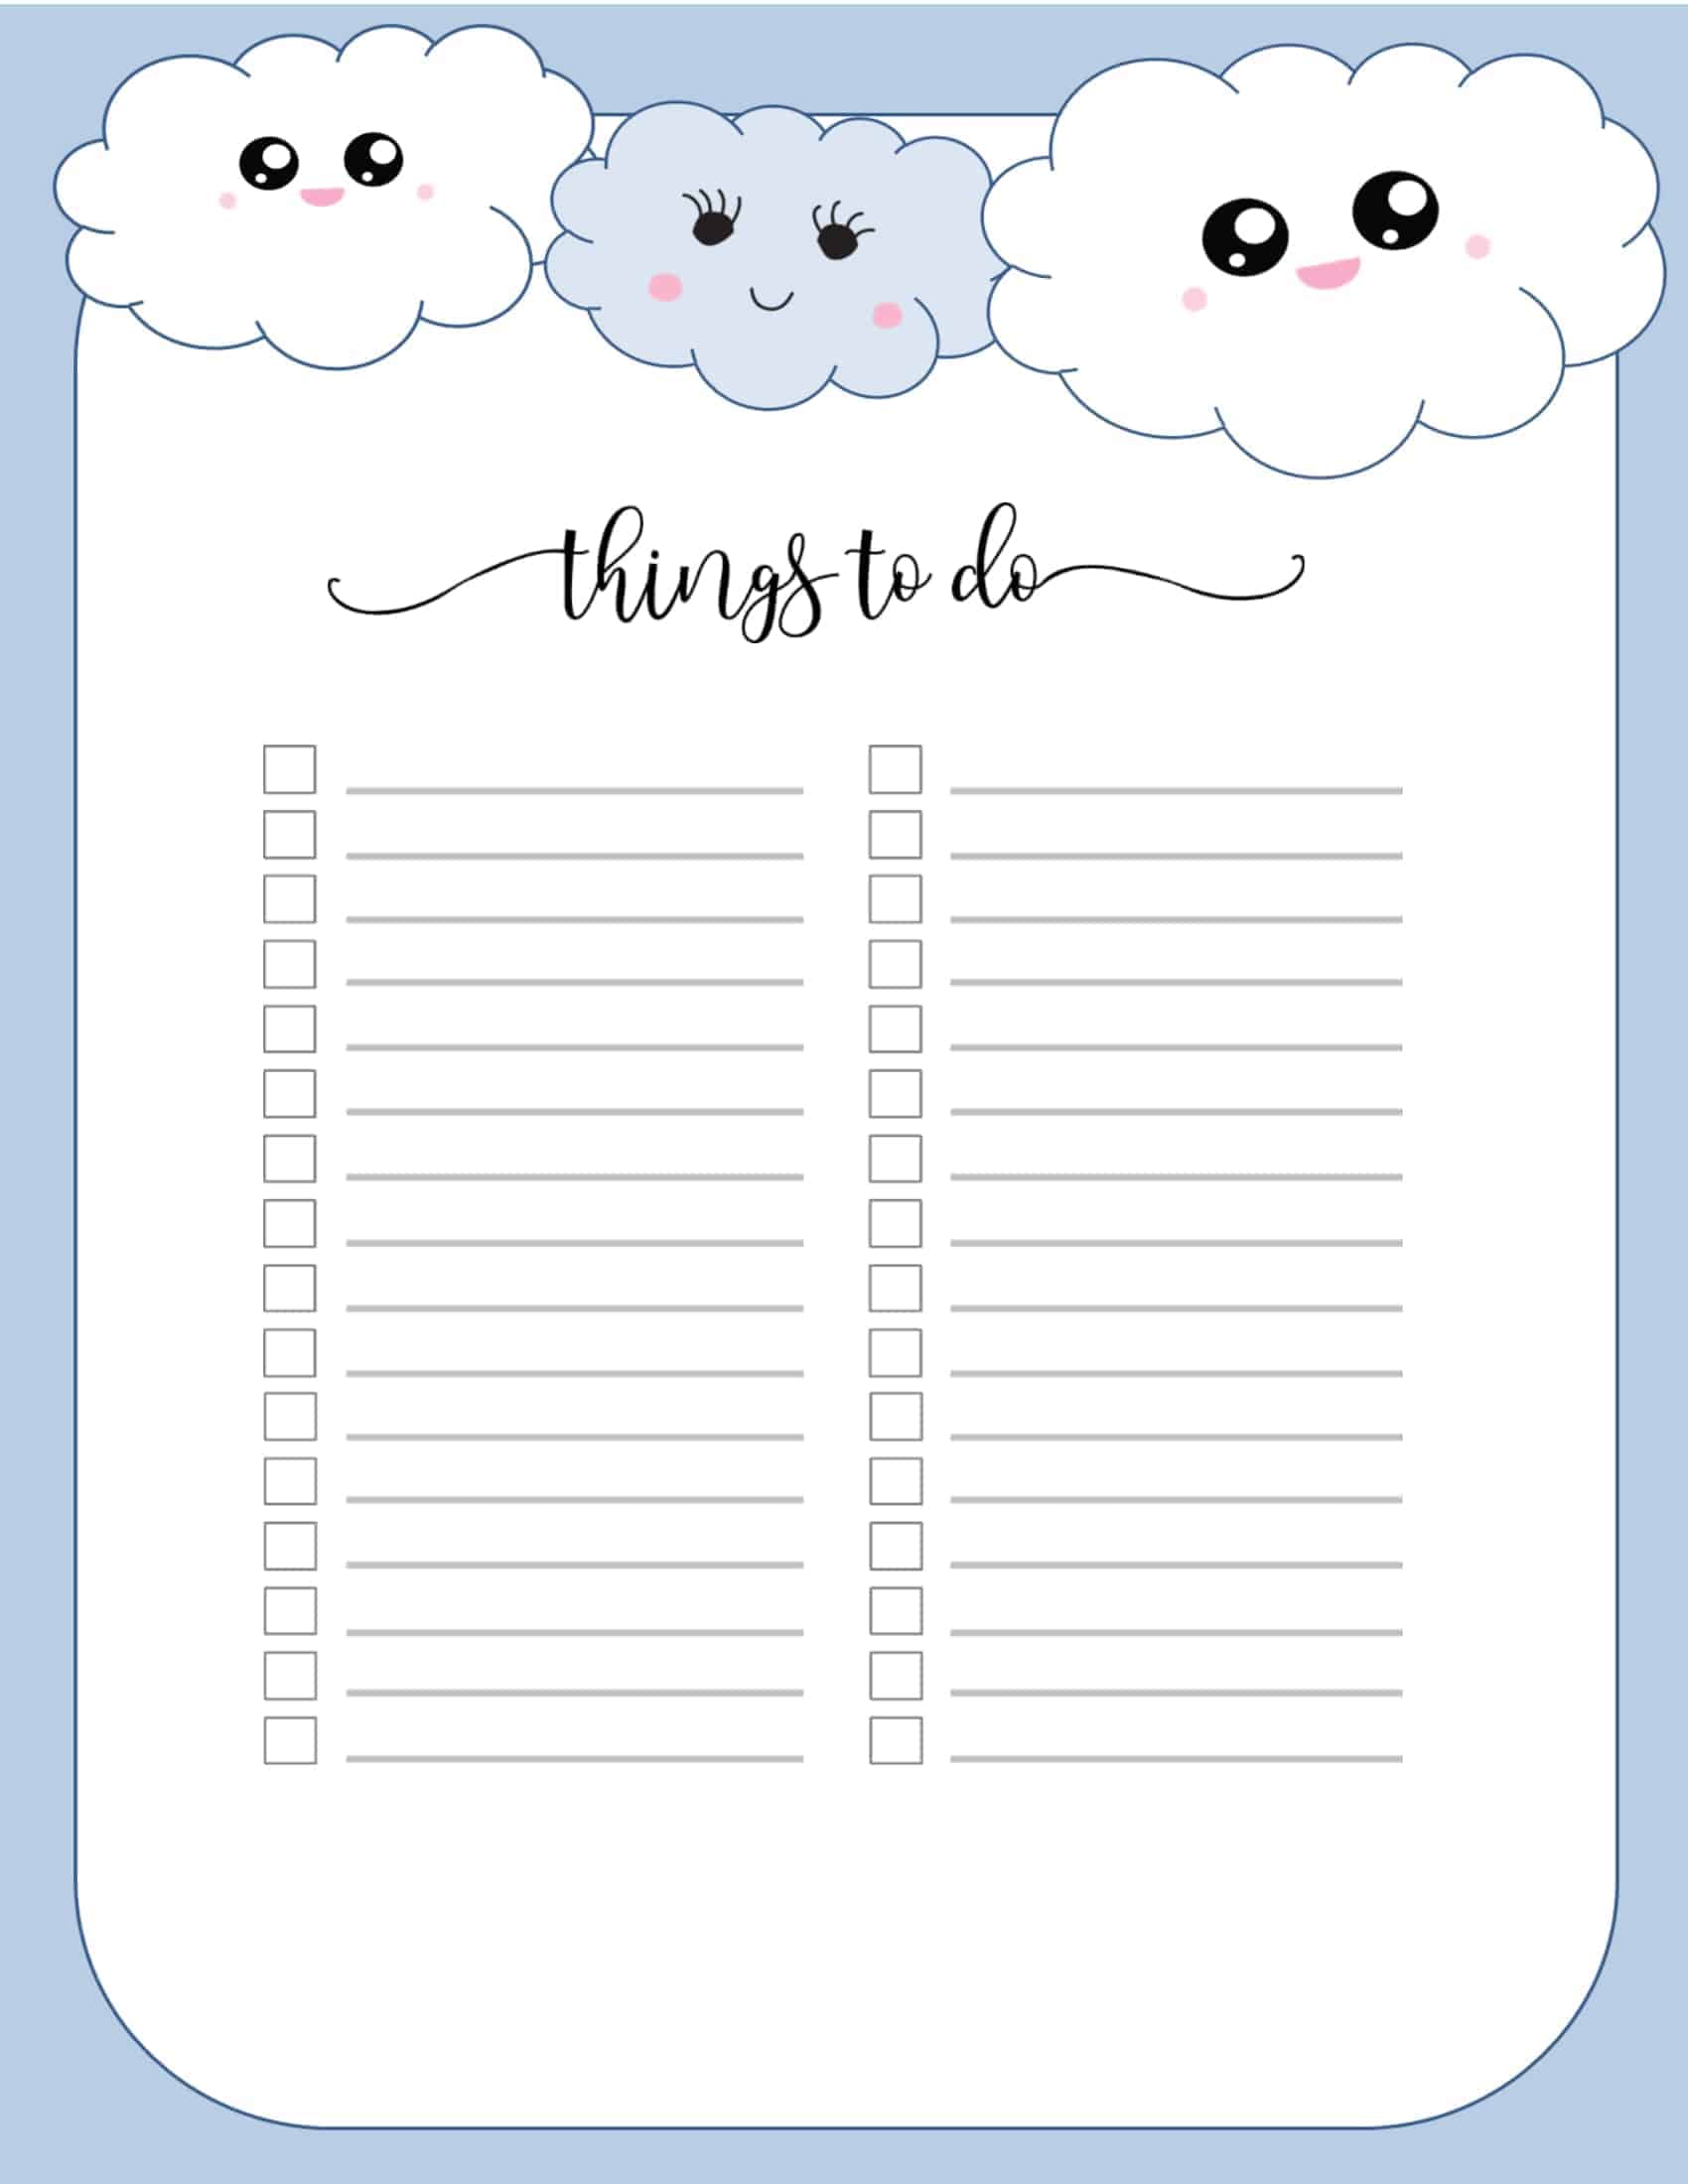 How To Make Cute Printable Templates Printable Form, Templates and Letter